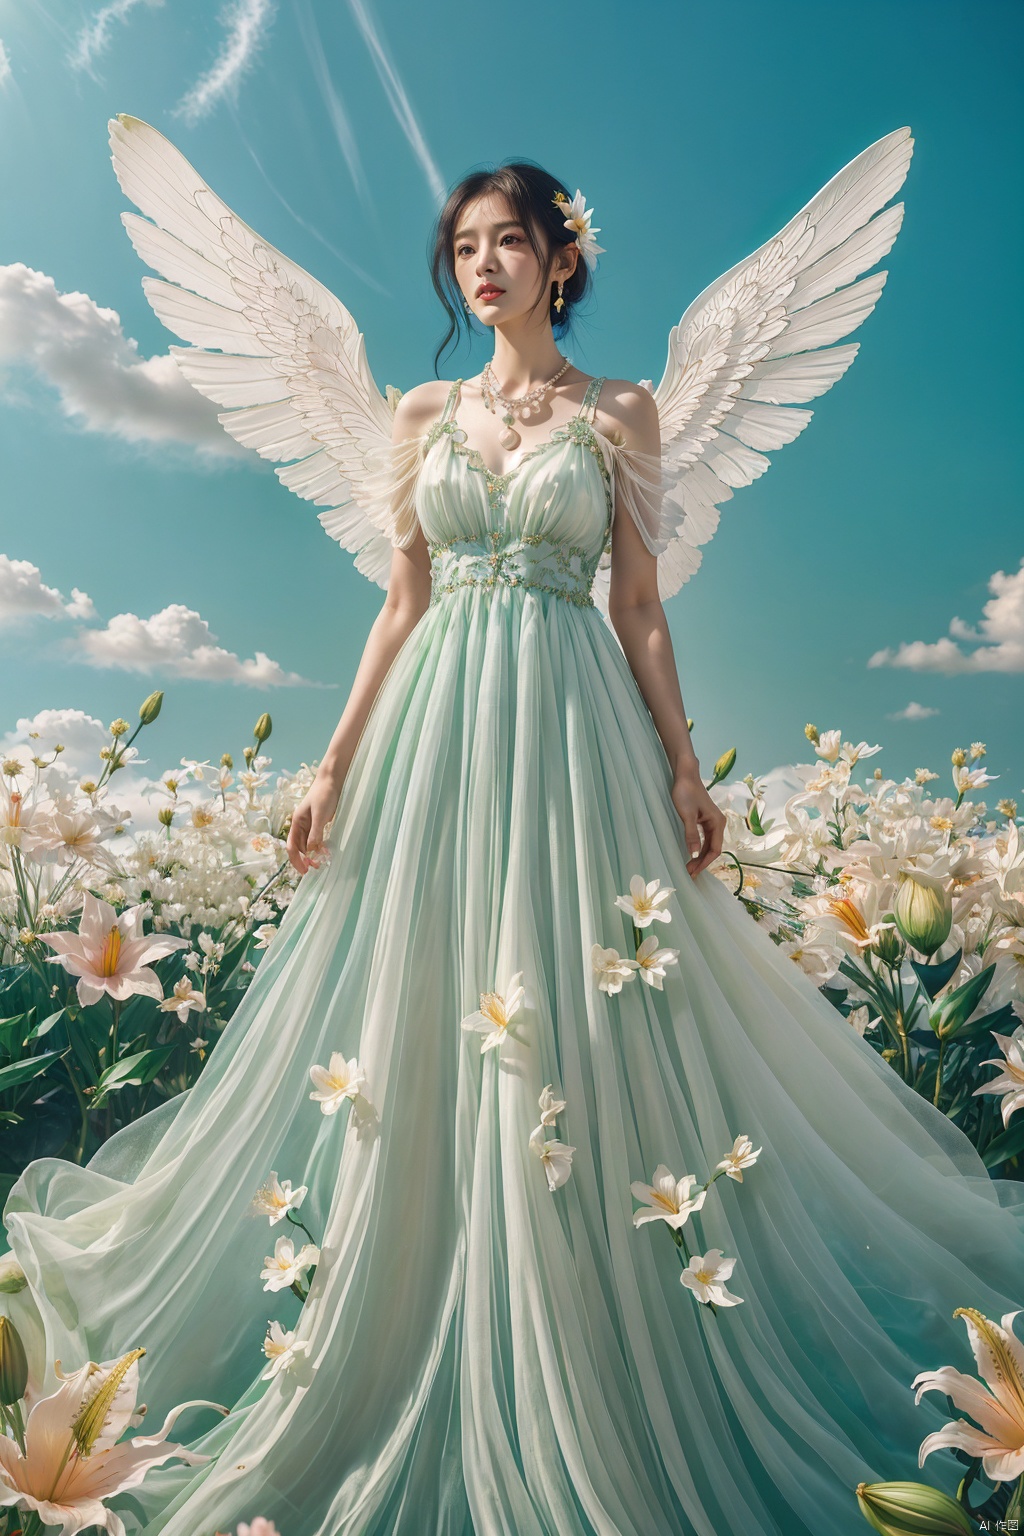  Quality, 8K, extremely intricate details, 1 girl, Lolita, gradient color, careful eyes, transparent wings, gradient art, in the flowers, (huge lily :1.1), sky, (White cloud :0.9), full lens, necklace, pearls and jewelry, 1 girl, flowing dress, light green dress, huge flowers, wide Angle, hdr, sd_mai